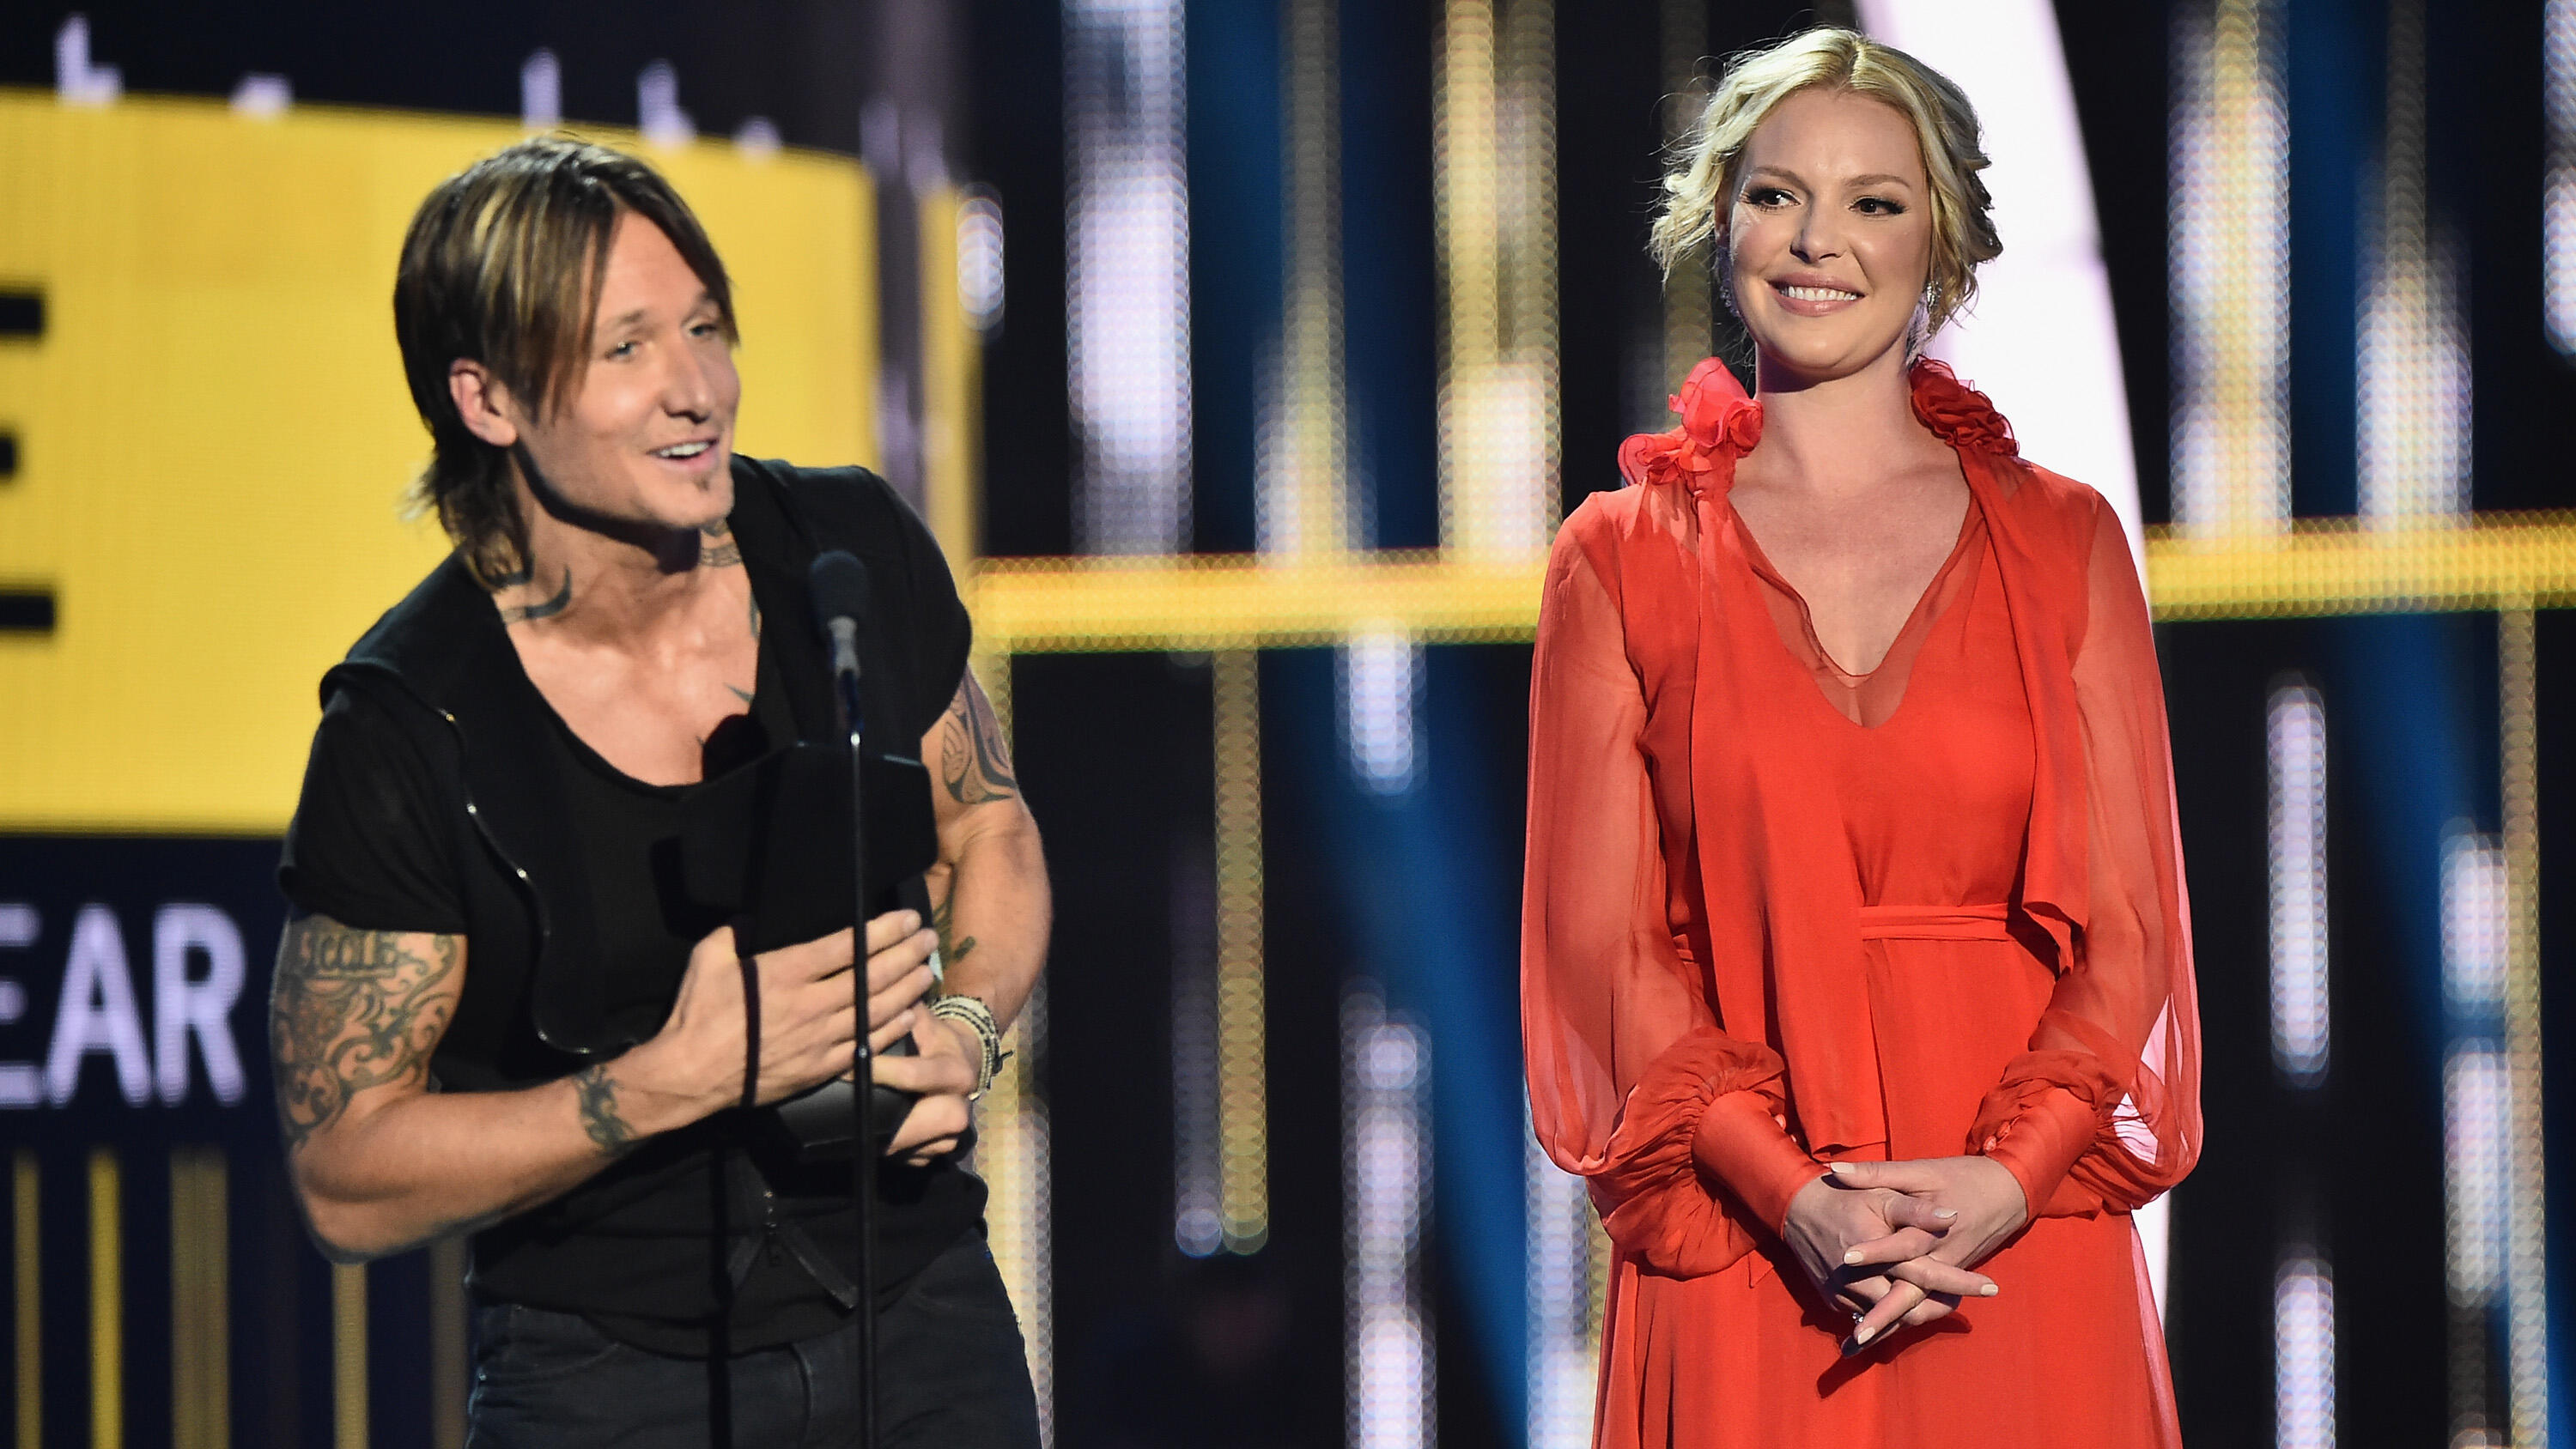 NASHVILLE, TN - JUNE 07:  Katherine Heigl (R) presents Keith Urban (L) with an award during the 2017 CMT Music Awards at the Music City Center on June 6, 2017 in Nashville, Tennessee.  (Photo by Michael Loccisano/Getty Images for CMT)